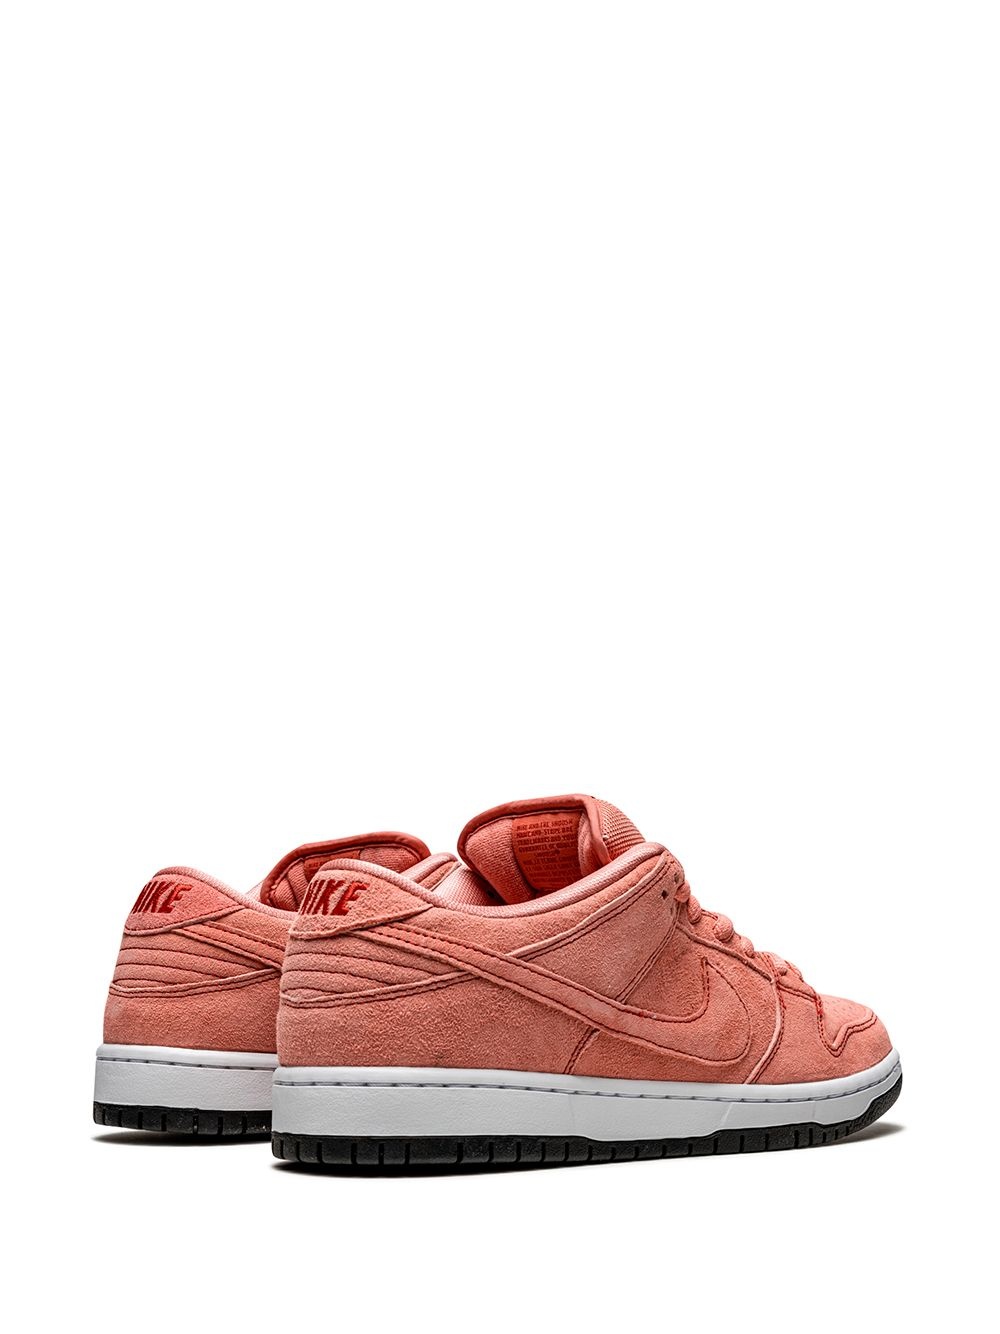 SB Dunk Low Pro "Pink Pig" sneakers - 3